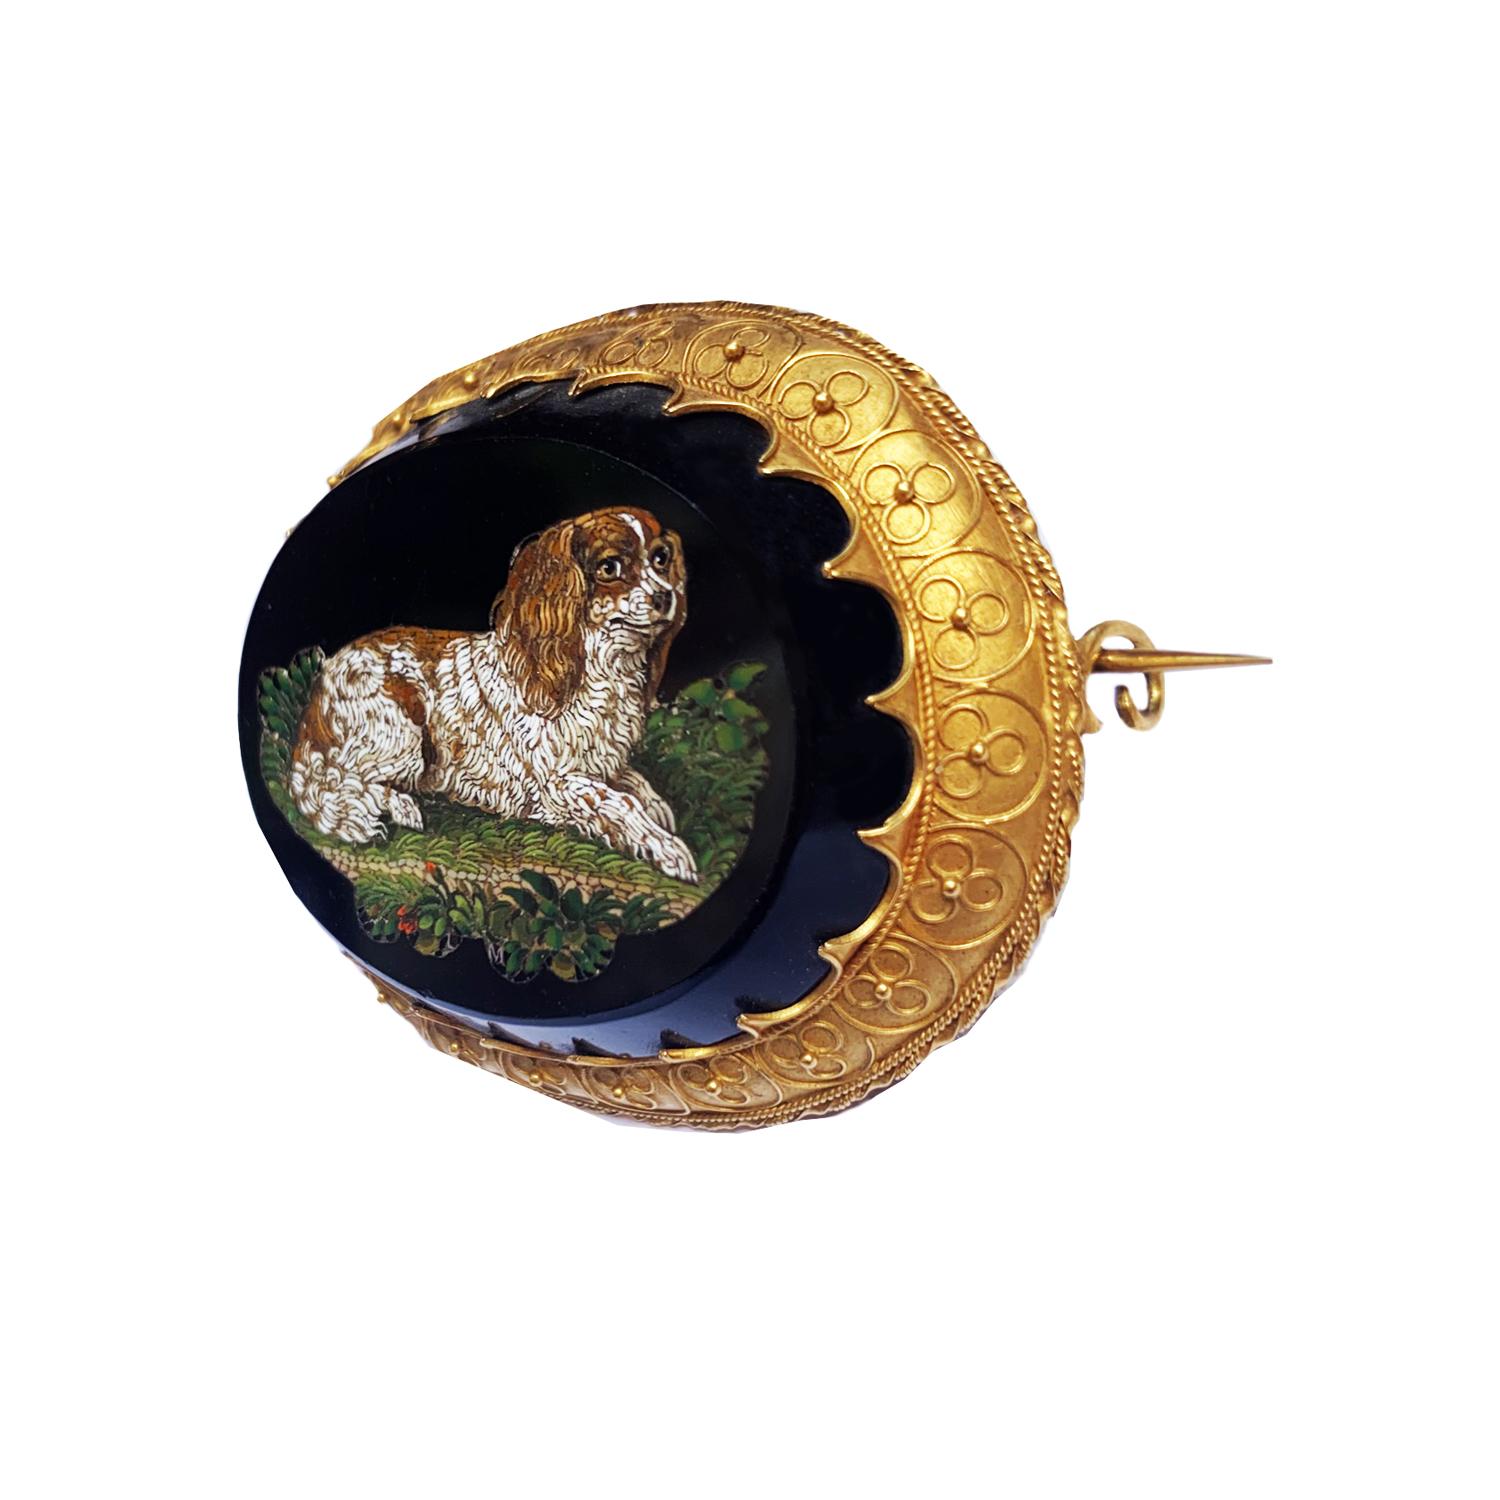 This Gold and Micromosaic brooch was made by Luigi Moglia, famous micromosaics of the Vatican Mosaic Studio -circa 1840, and depict a little dog.
In the grass under the dog, there is Moglia's signature, LM

The Museo Borgogna in Vercelli has a